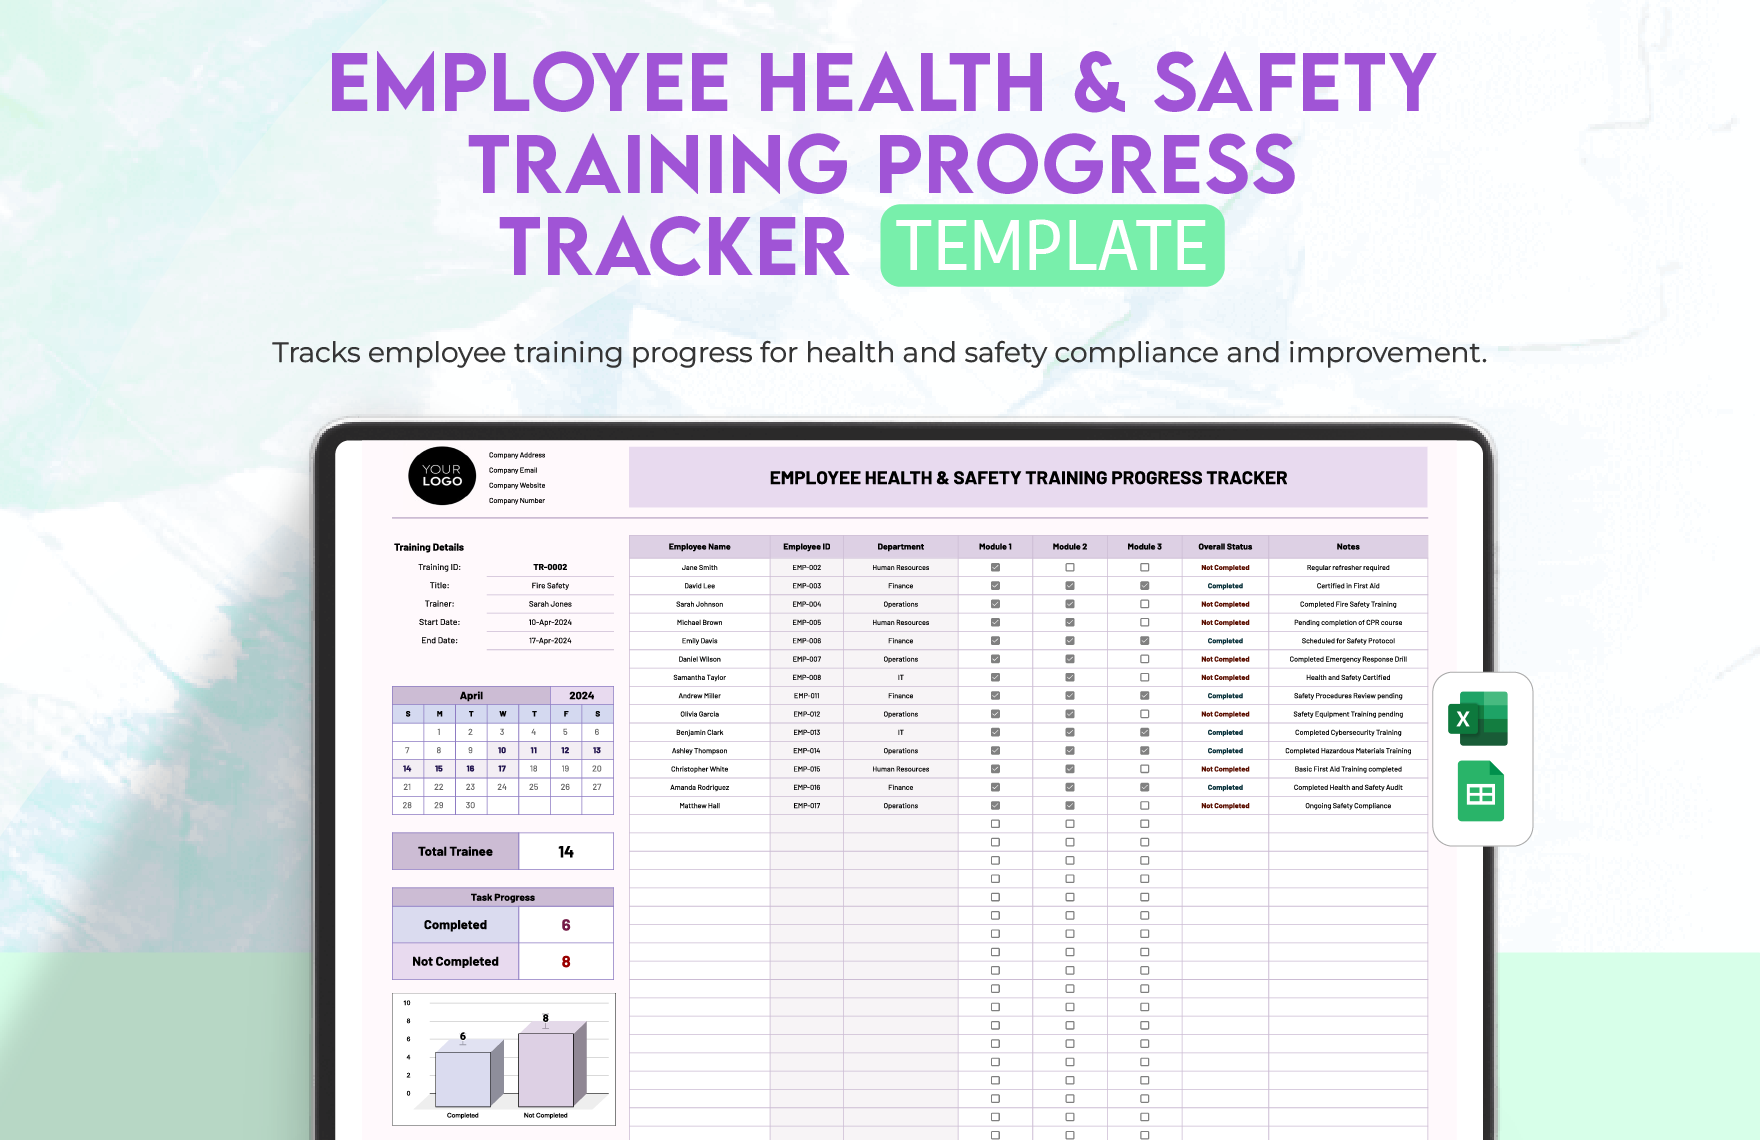 Employee Health & Safety Training Progress Tracker Template in Excel, Google Sheets